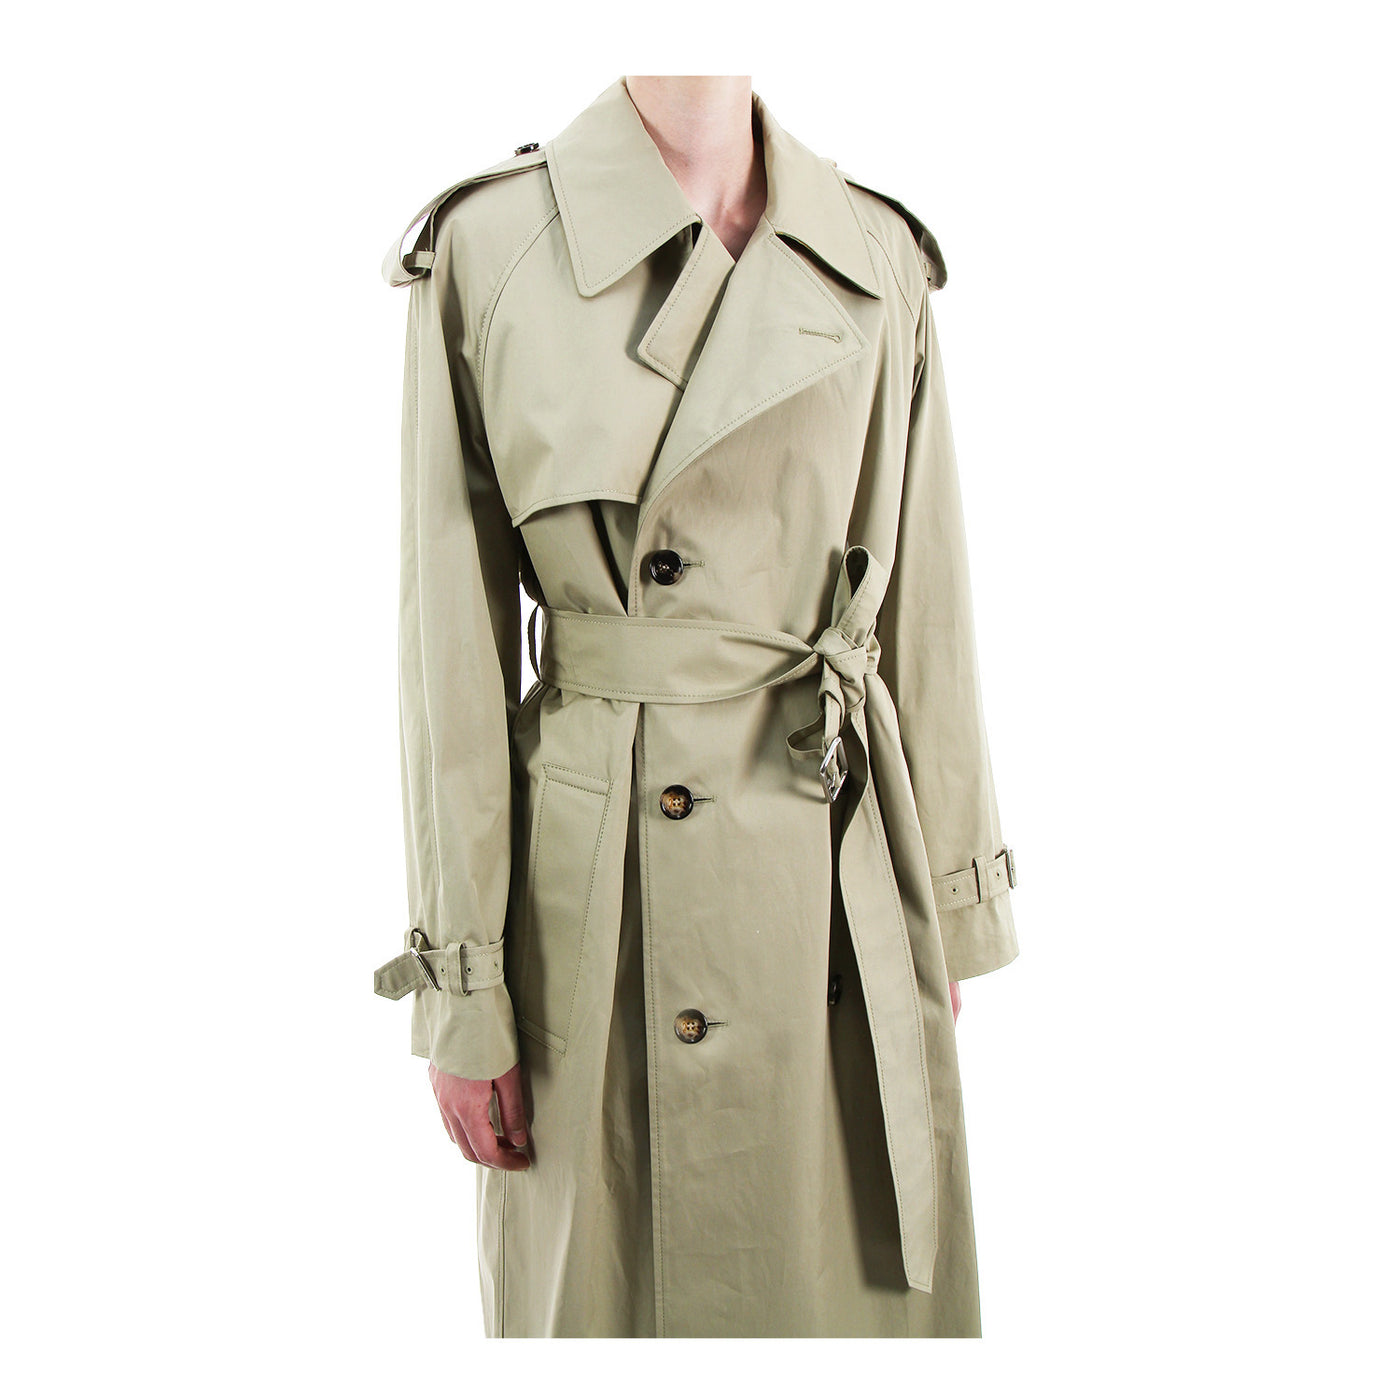 Trenchcoat The Castleford aus Baumwolle